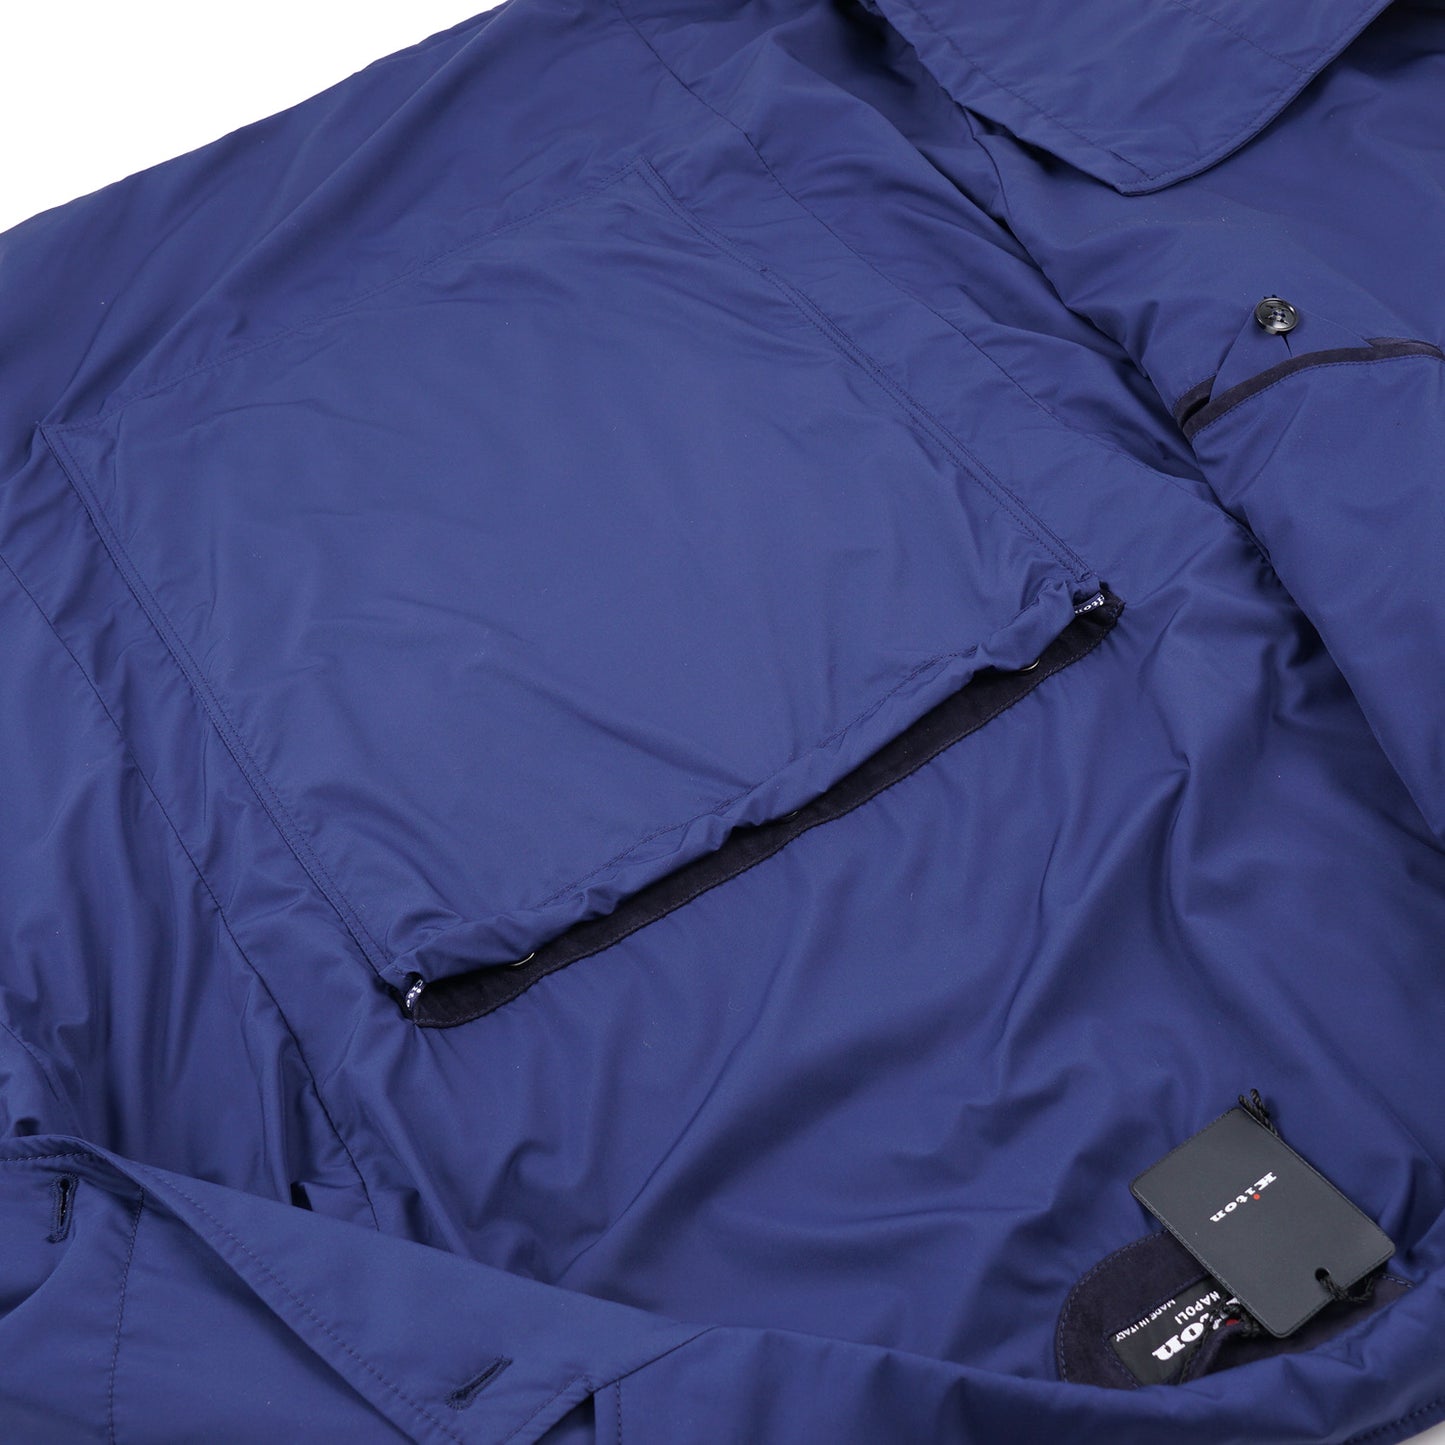 Kiton Quilted Packable Travel Jacket - Top Shelf Apparel